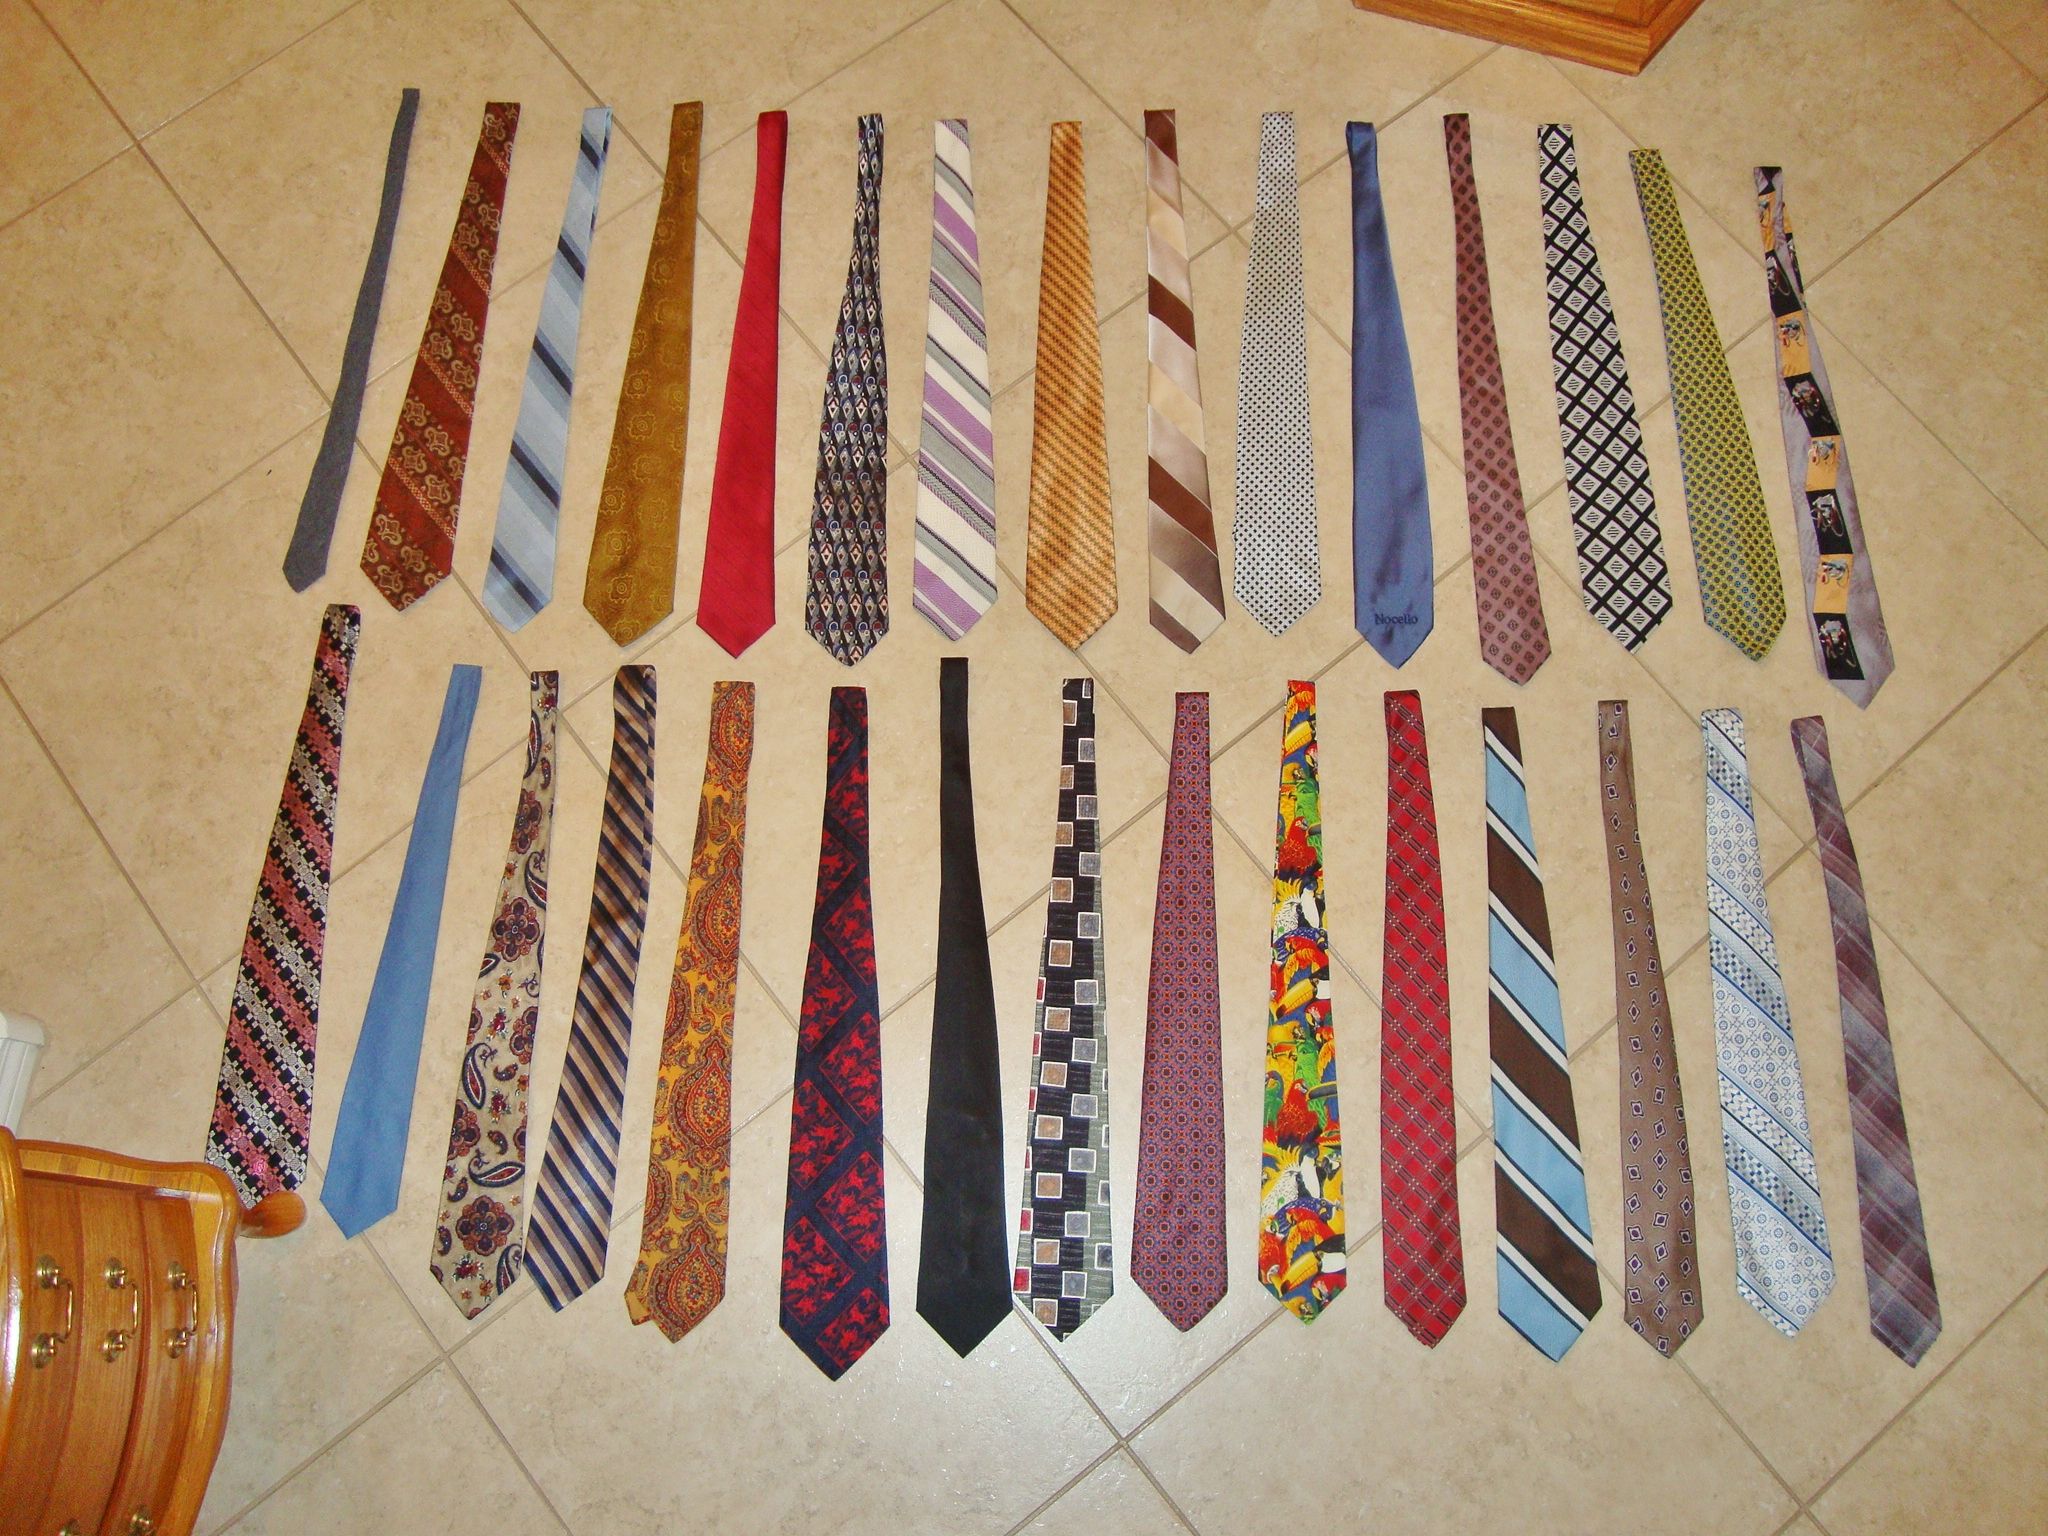 (FREE DELIVERY) 30 men's neckties for $9 -- wow!!